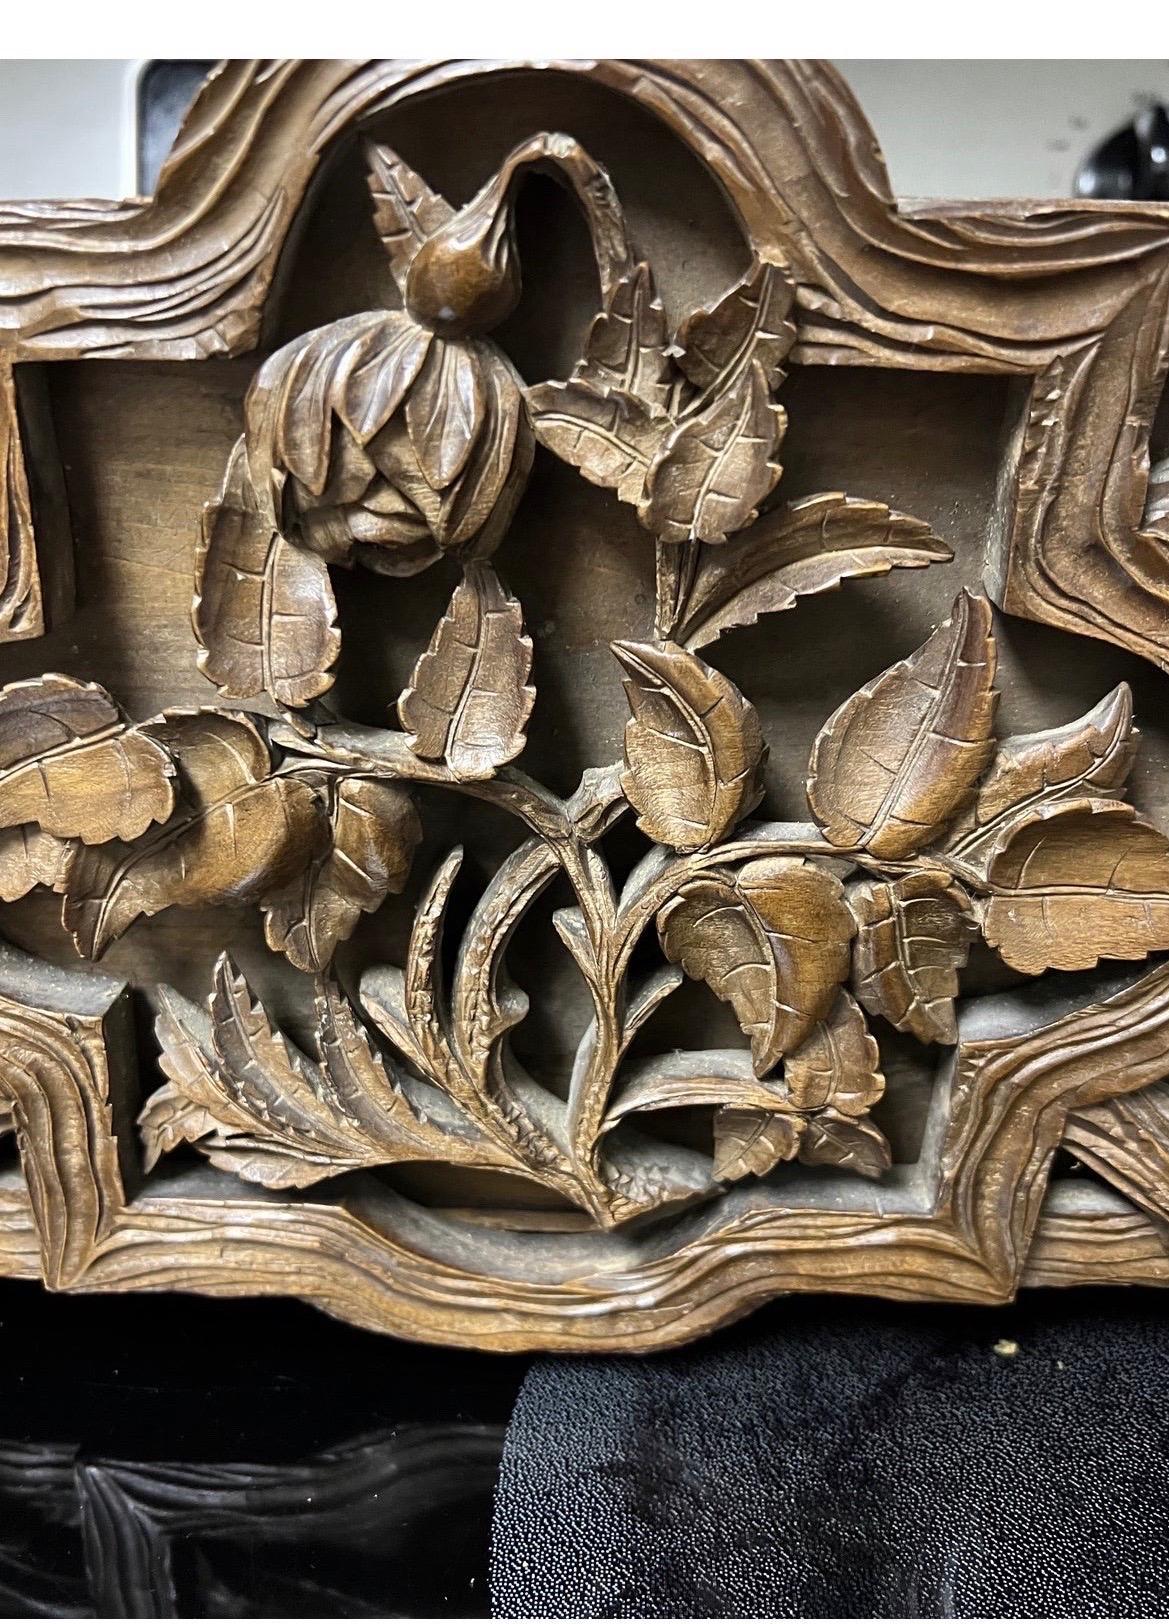 Absolutely stunning carving on this lightweight planter. Absolutely no damage. Beautiful feet, foliate carvings.